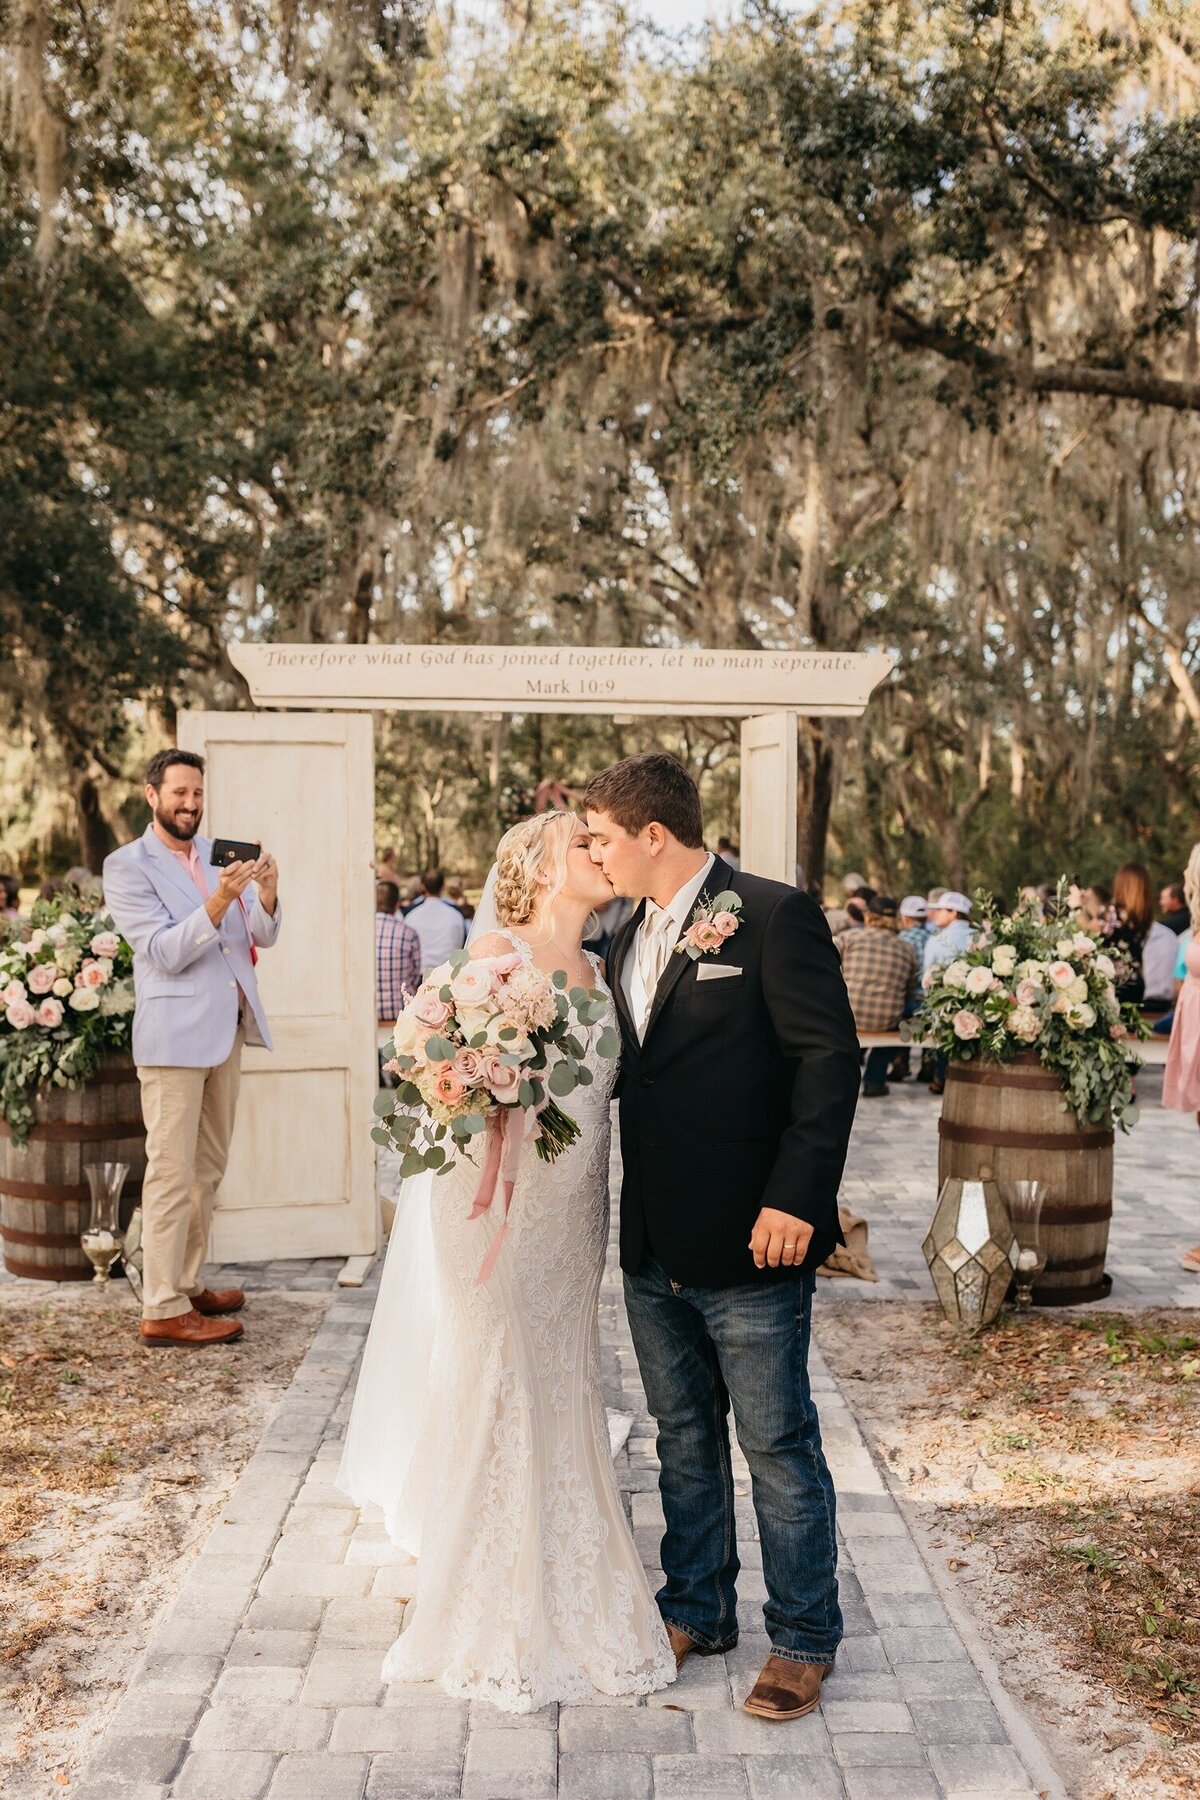 Legacy at Oak Meadows Wedding Venue - Pierson - Gainesville Florida - Weddings and Events41